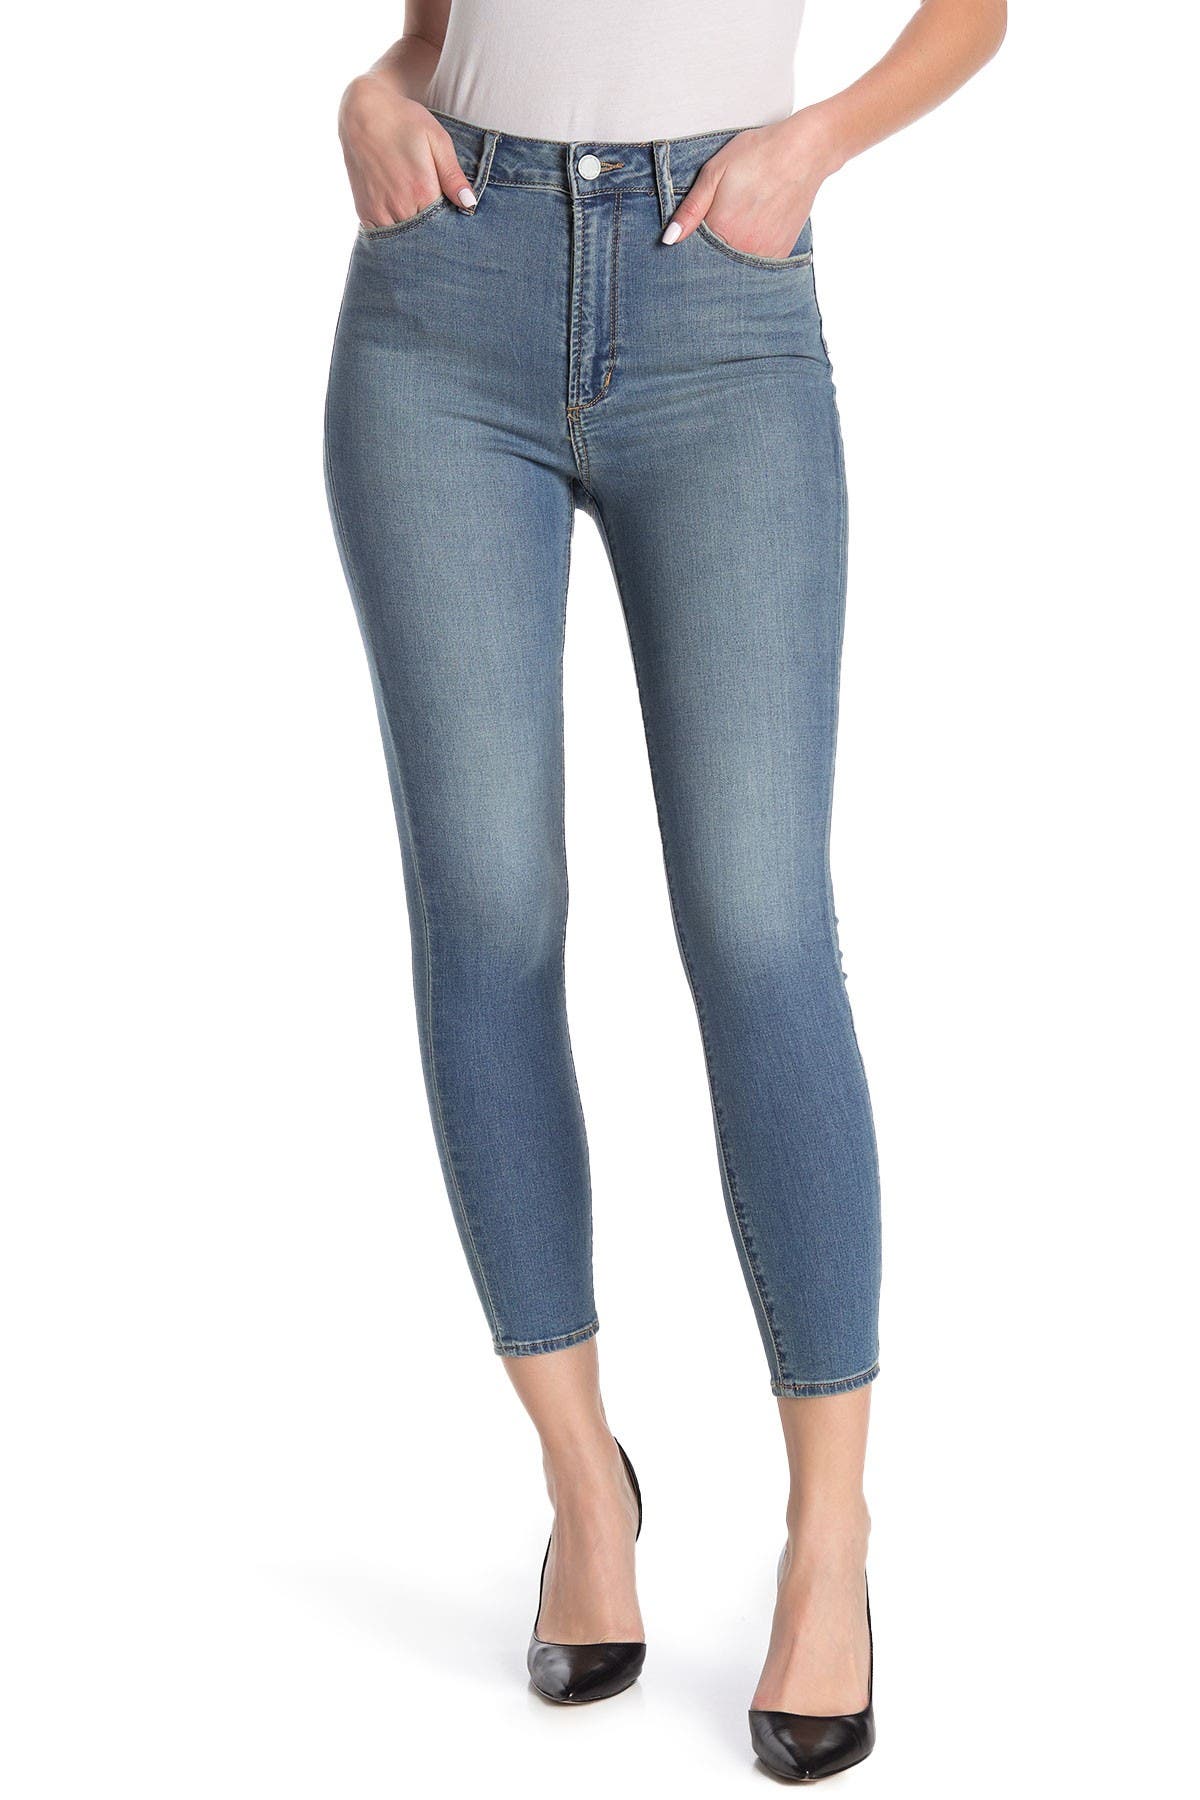 articles of society high waisted jeans